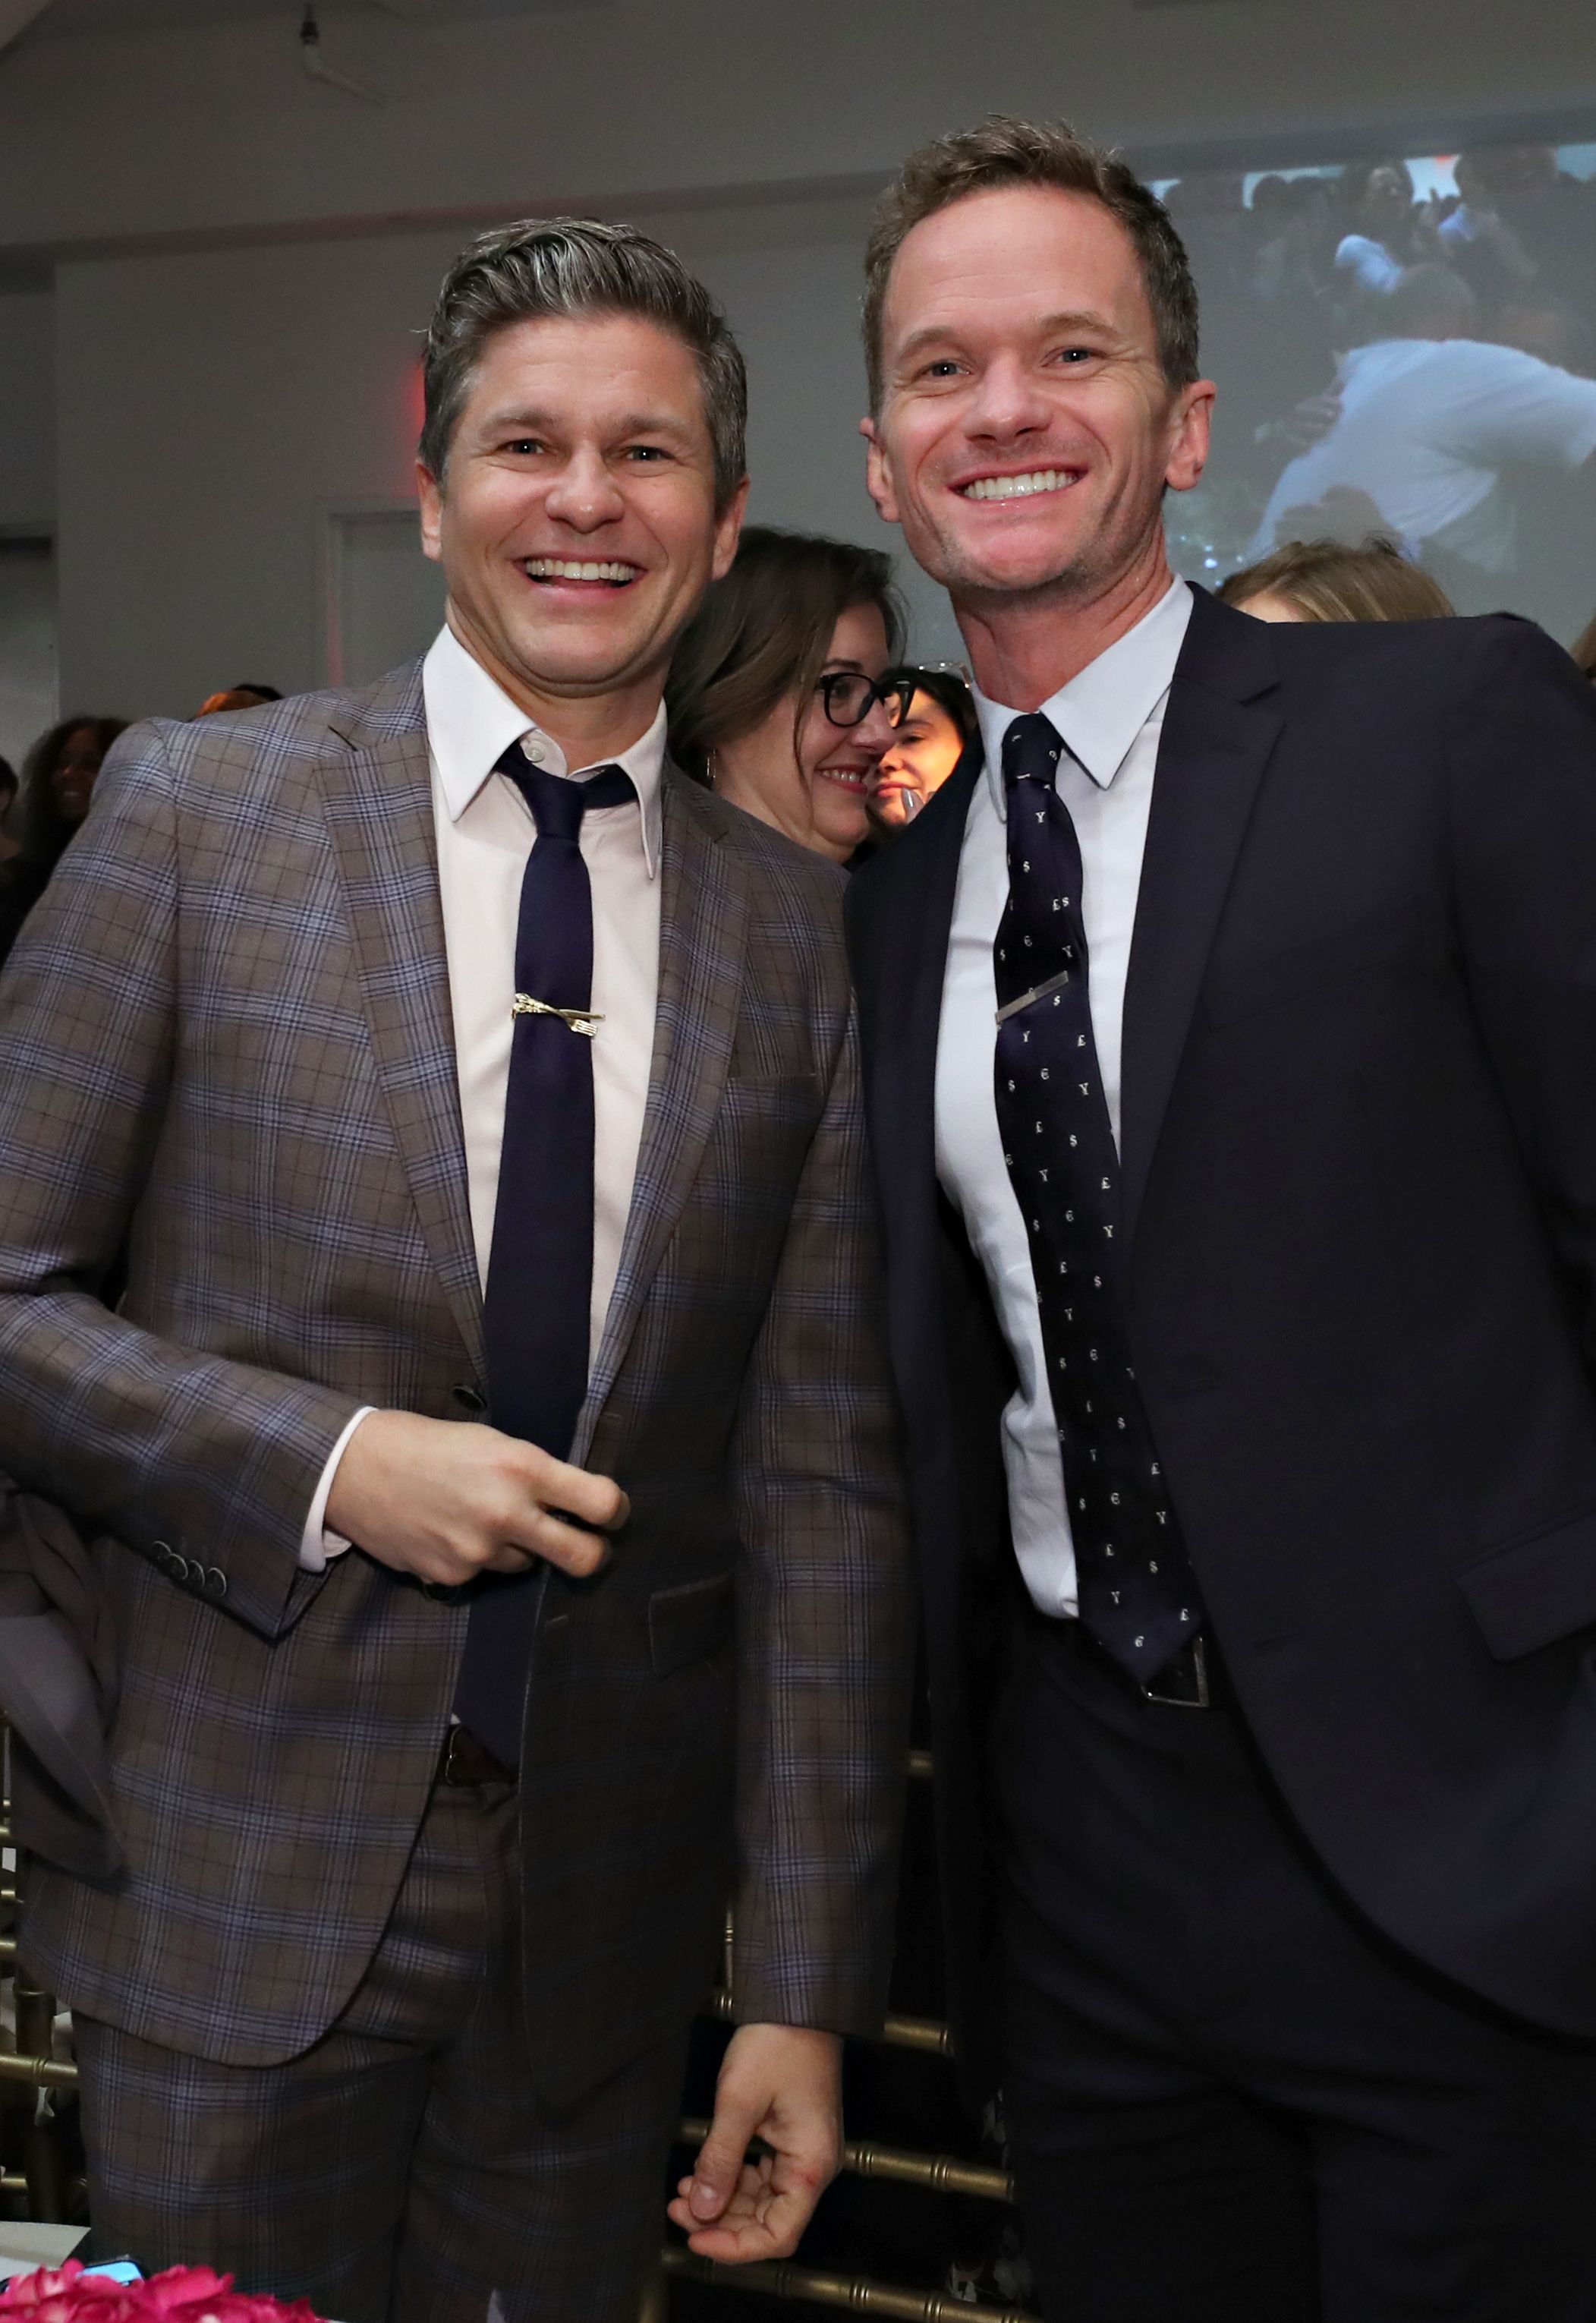 David Burtka and Neil Patrick Harris at the  Chefs For Kids' Cancer event on March 12, 2019 | Photo: Getty Images